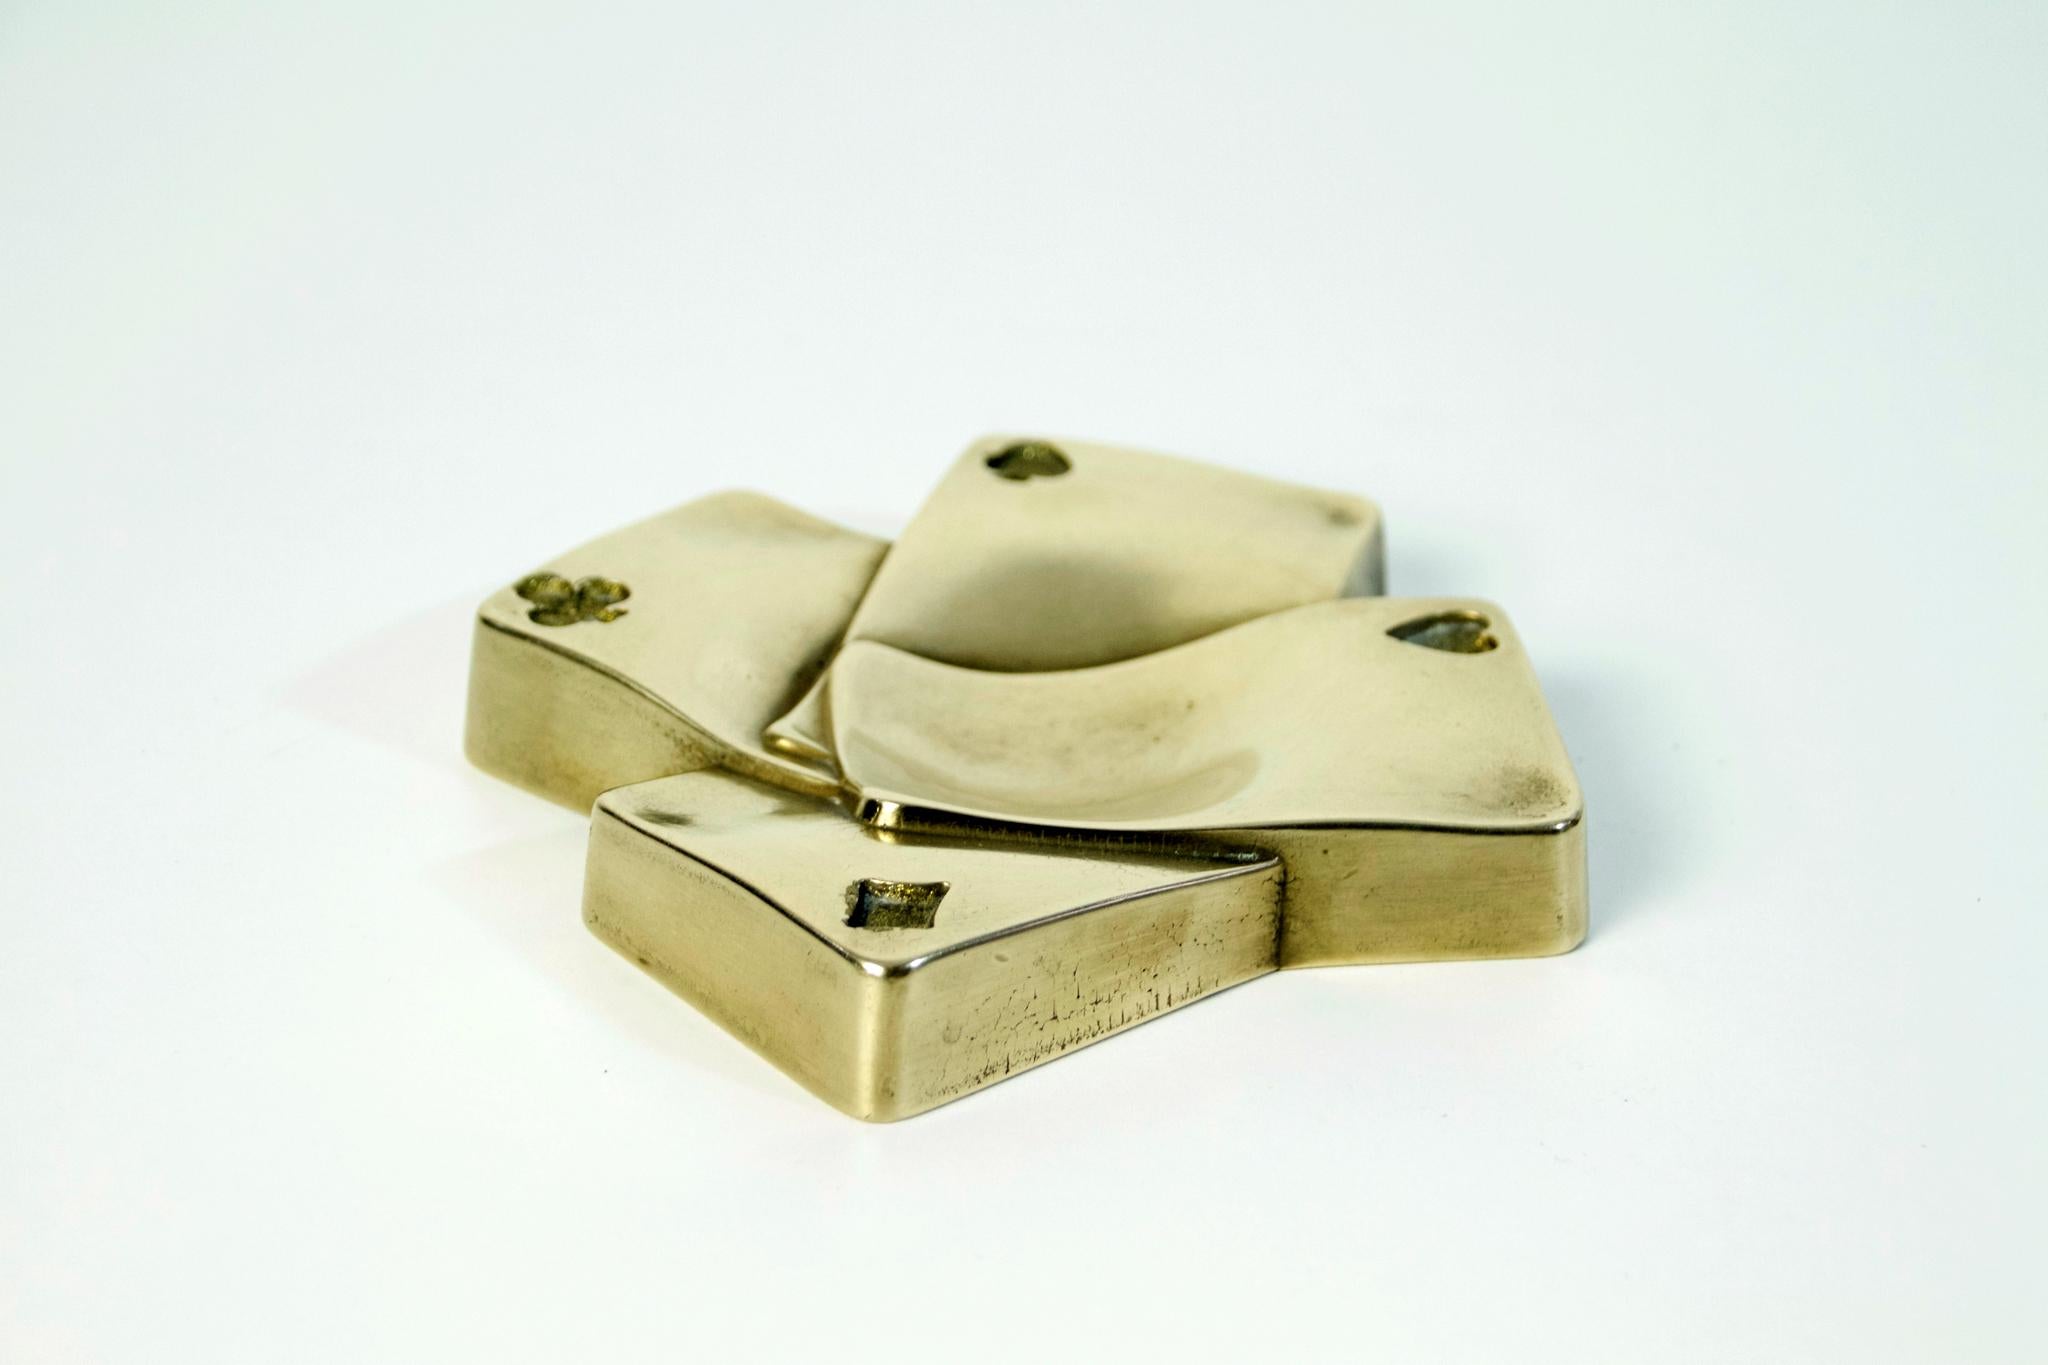 Sand cast bronze tray that can be used for keys, nick-nacks or as ashtray, or simply because it’s fun and beautiful.